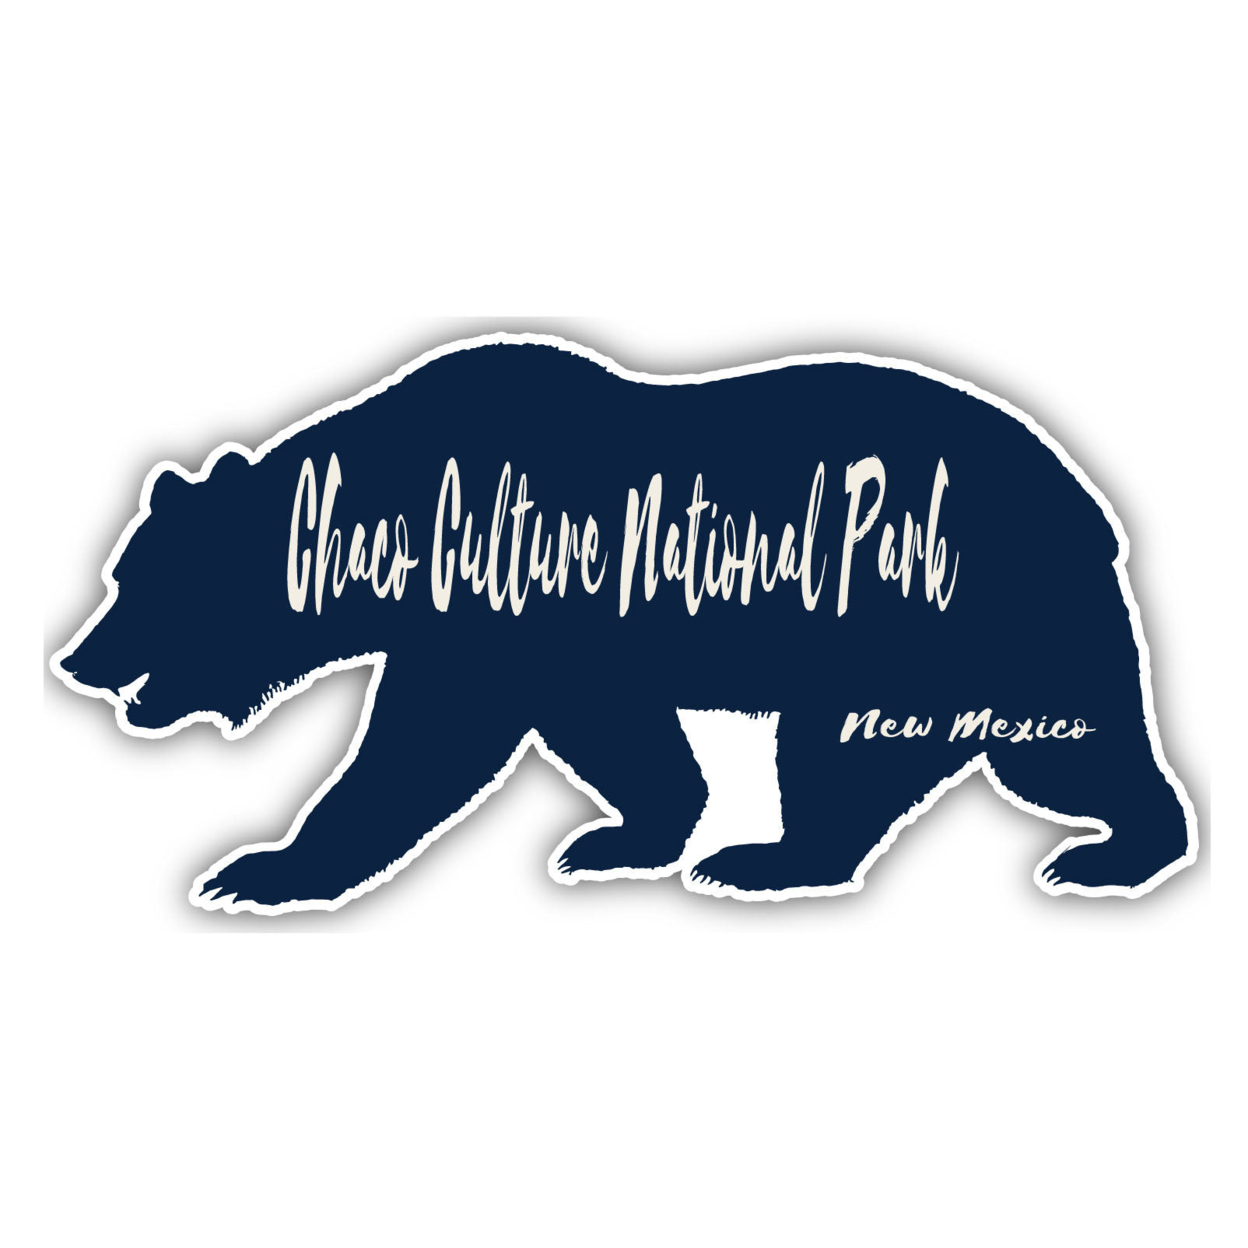 Chaco Culture National Park New Mexico Souvenir Decorative Stickers (Choose Theme And Size) - Single Unit, 4-Inch, Bear